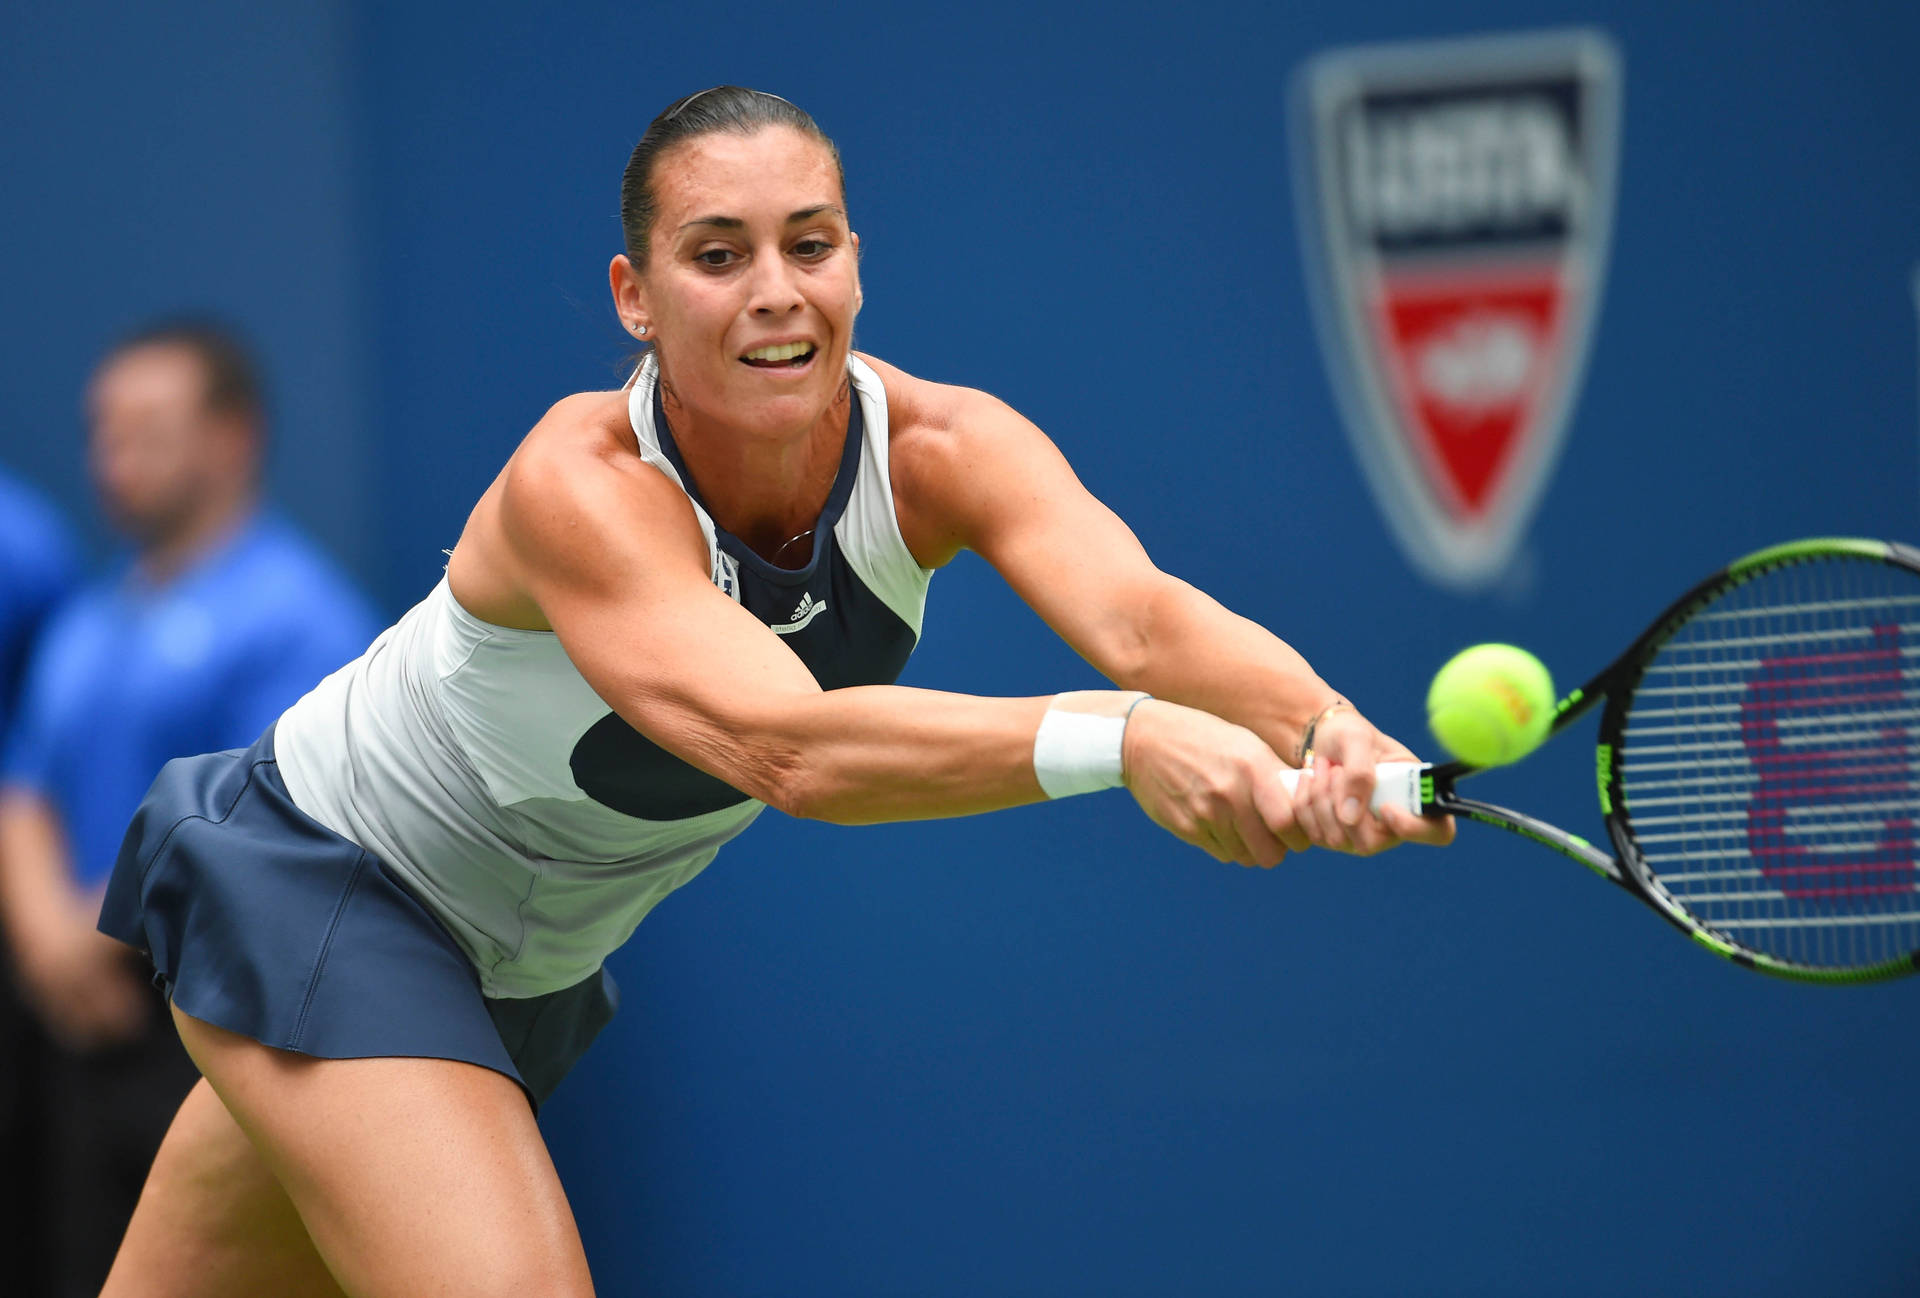 Flavia Pennetta in action on the tennis court Wallpaper